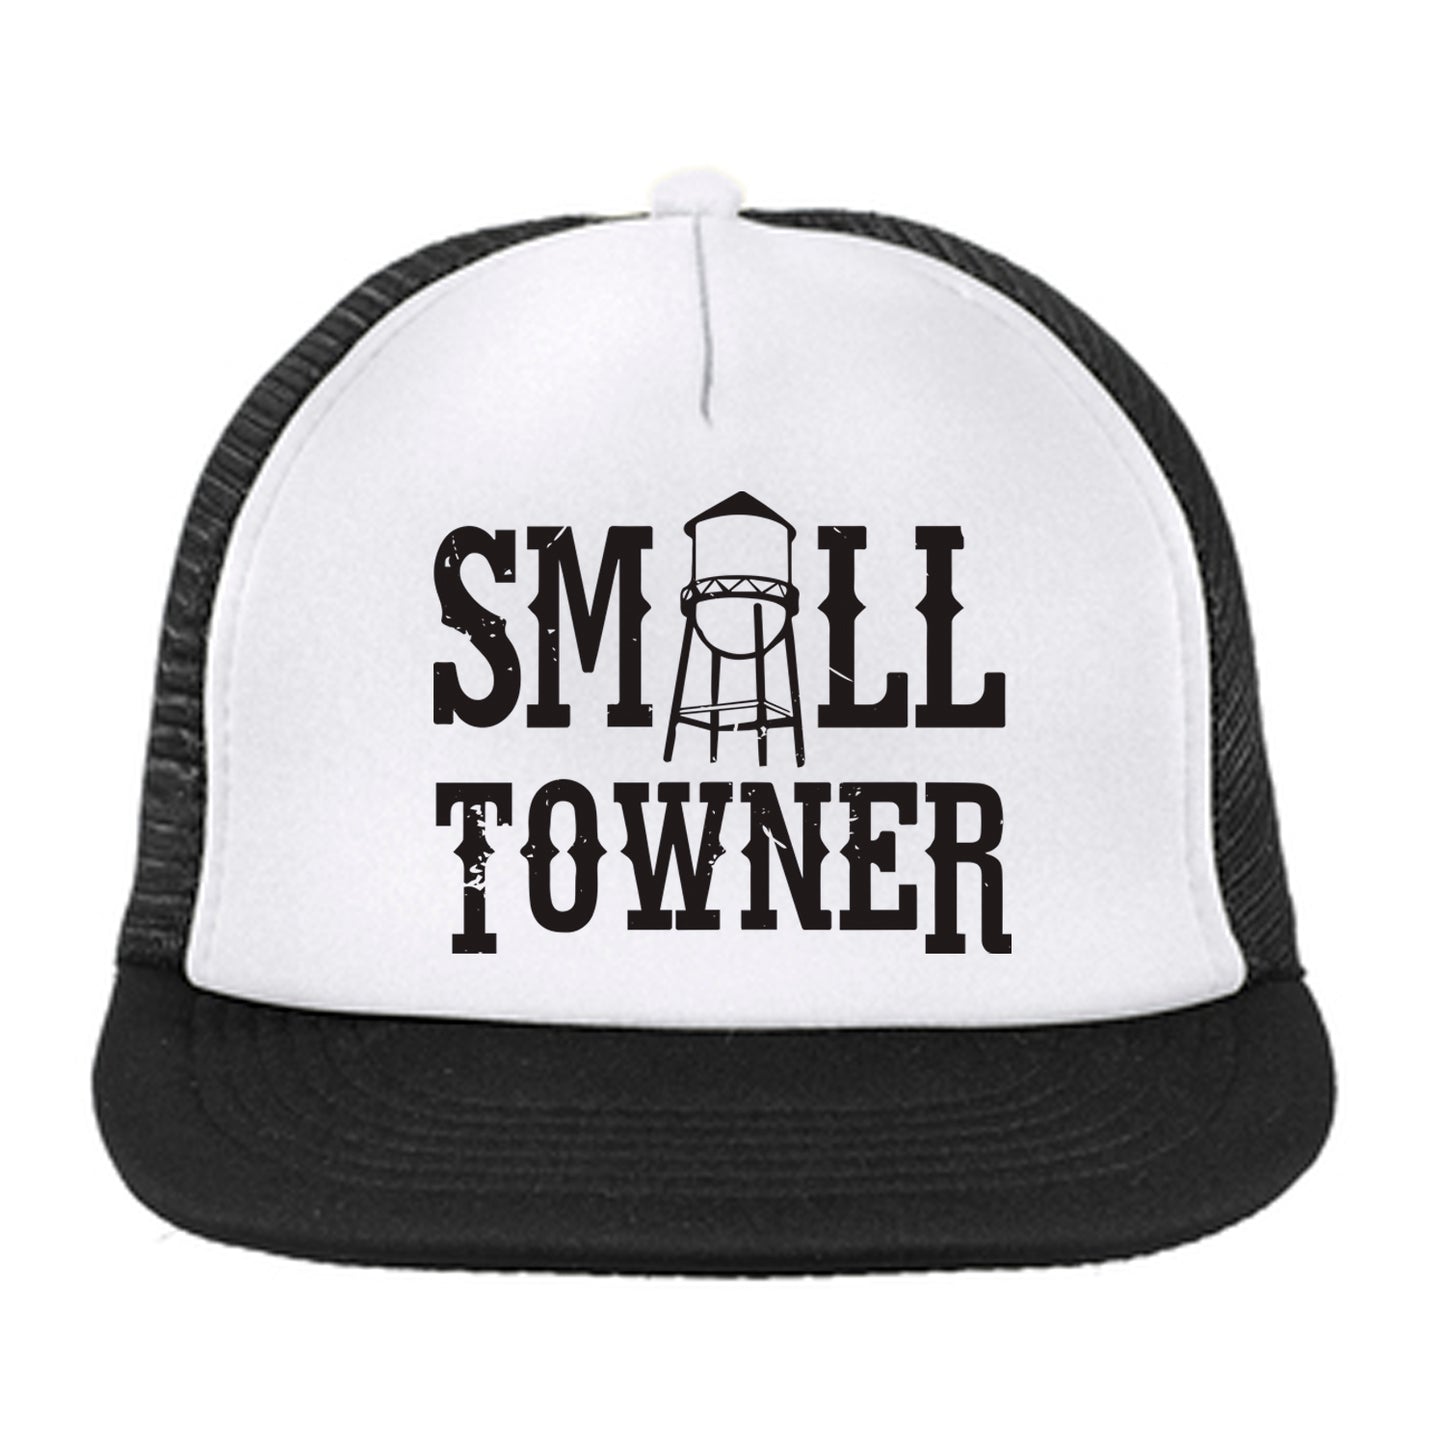 Small Towner Trucker Hat